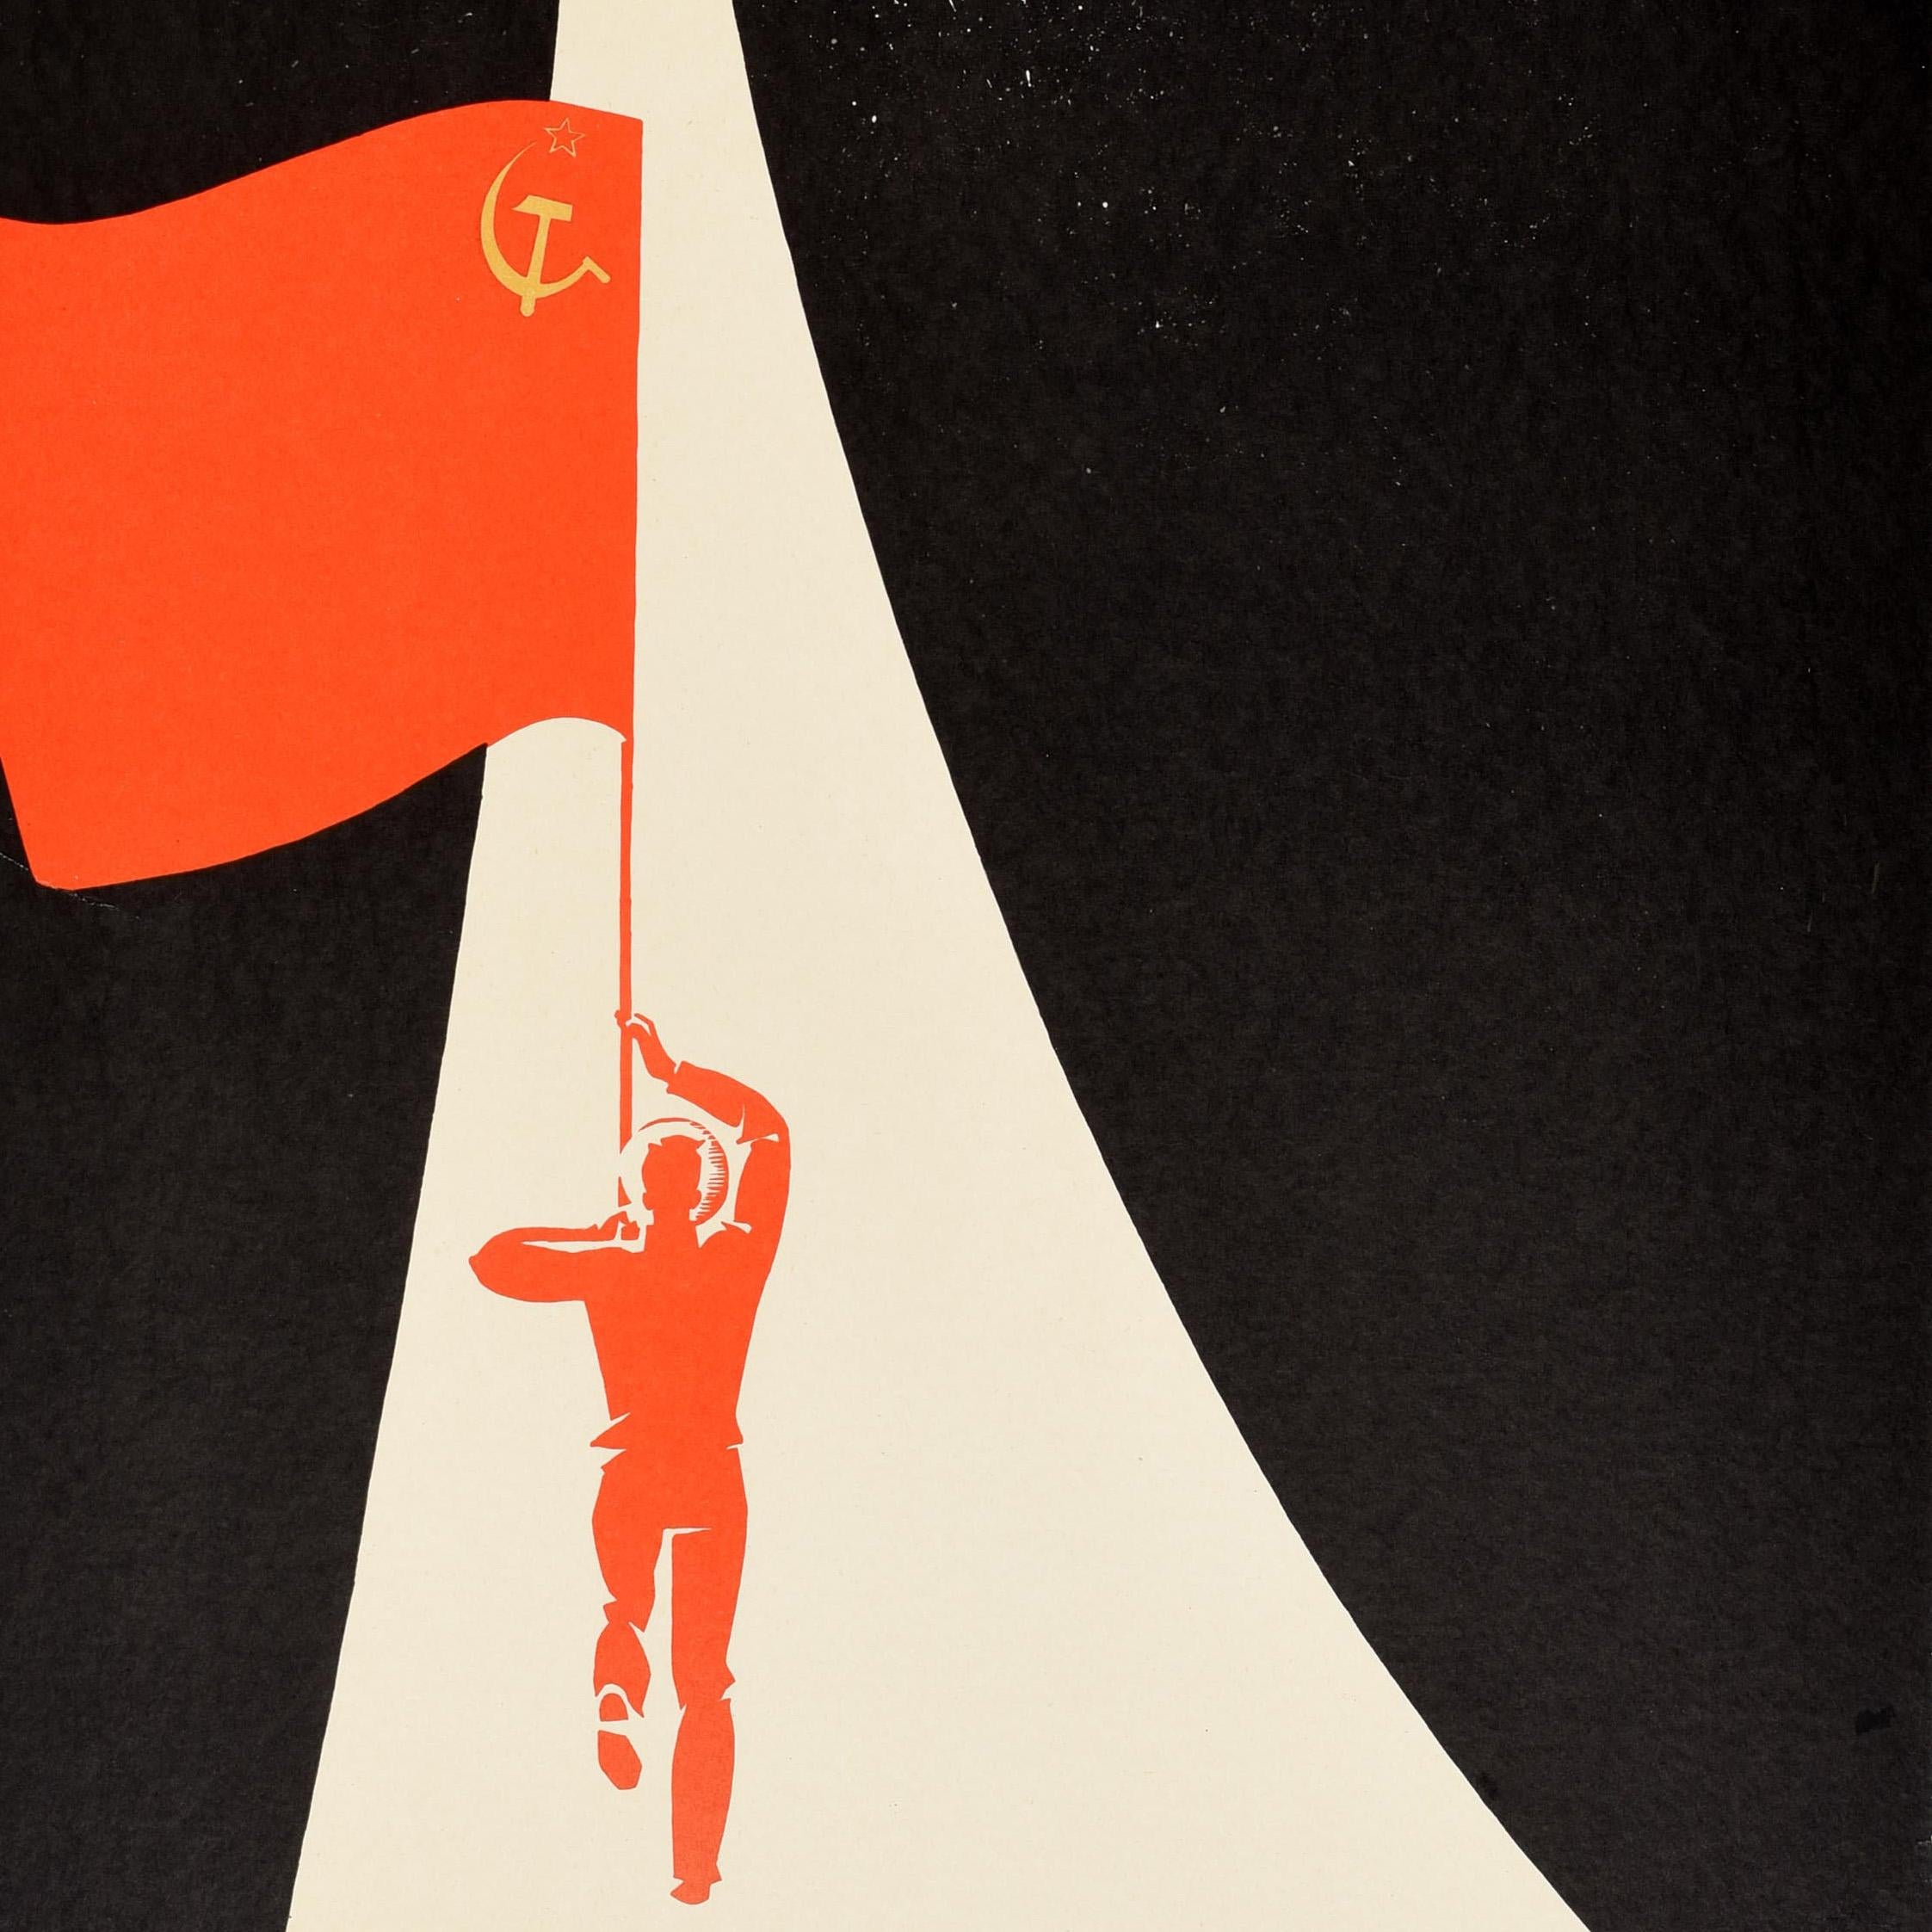 Original vintage Soviet propaganda poster - Through Worlds and Ages / ????? ???? ? ???? - featuring a stunning design depicting a man holding a flag in red with a Soviet hammer and sickle emblem on it, walking up a white rocket trail leading to the